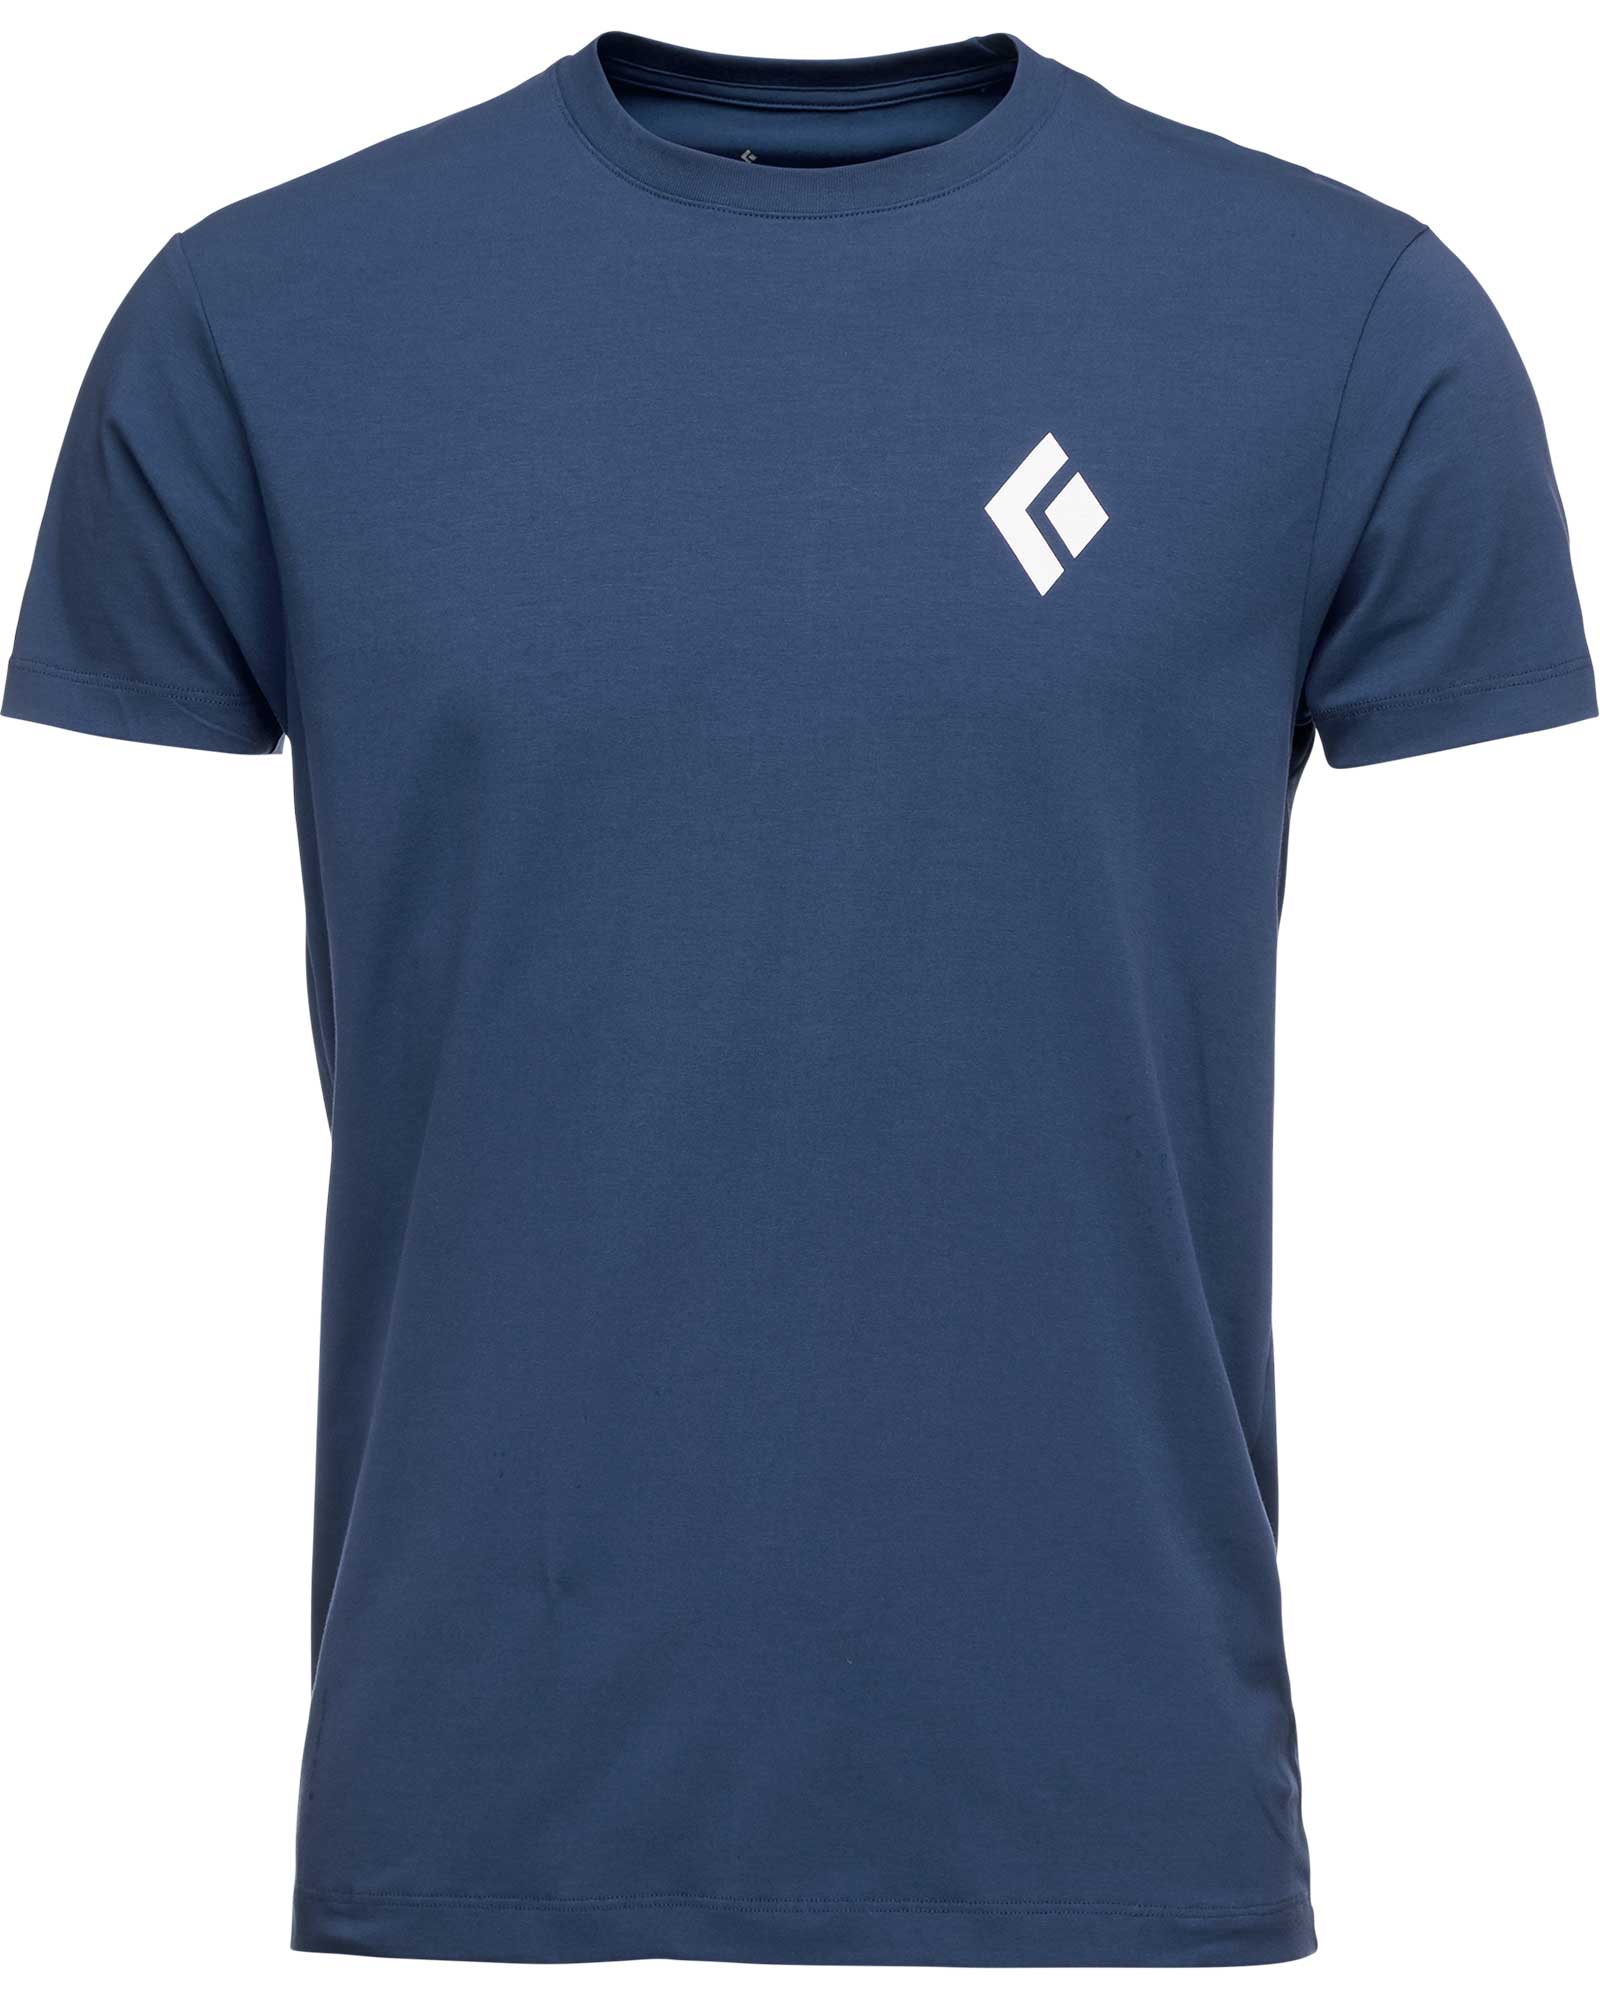 Product image of Black Diamond equipment for Alpinists Men's T-Shirt